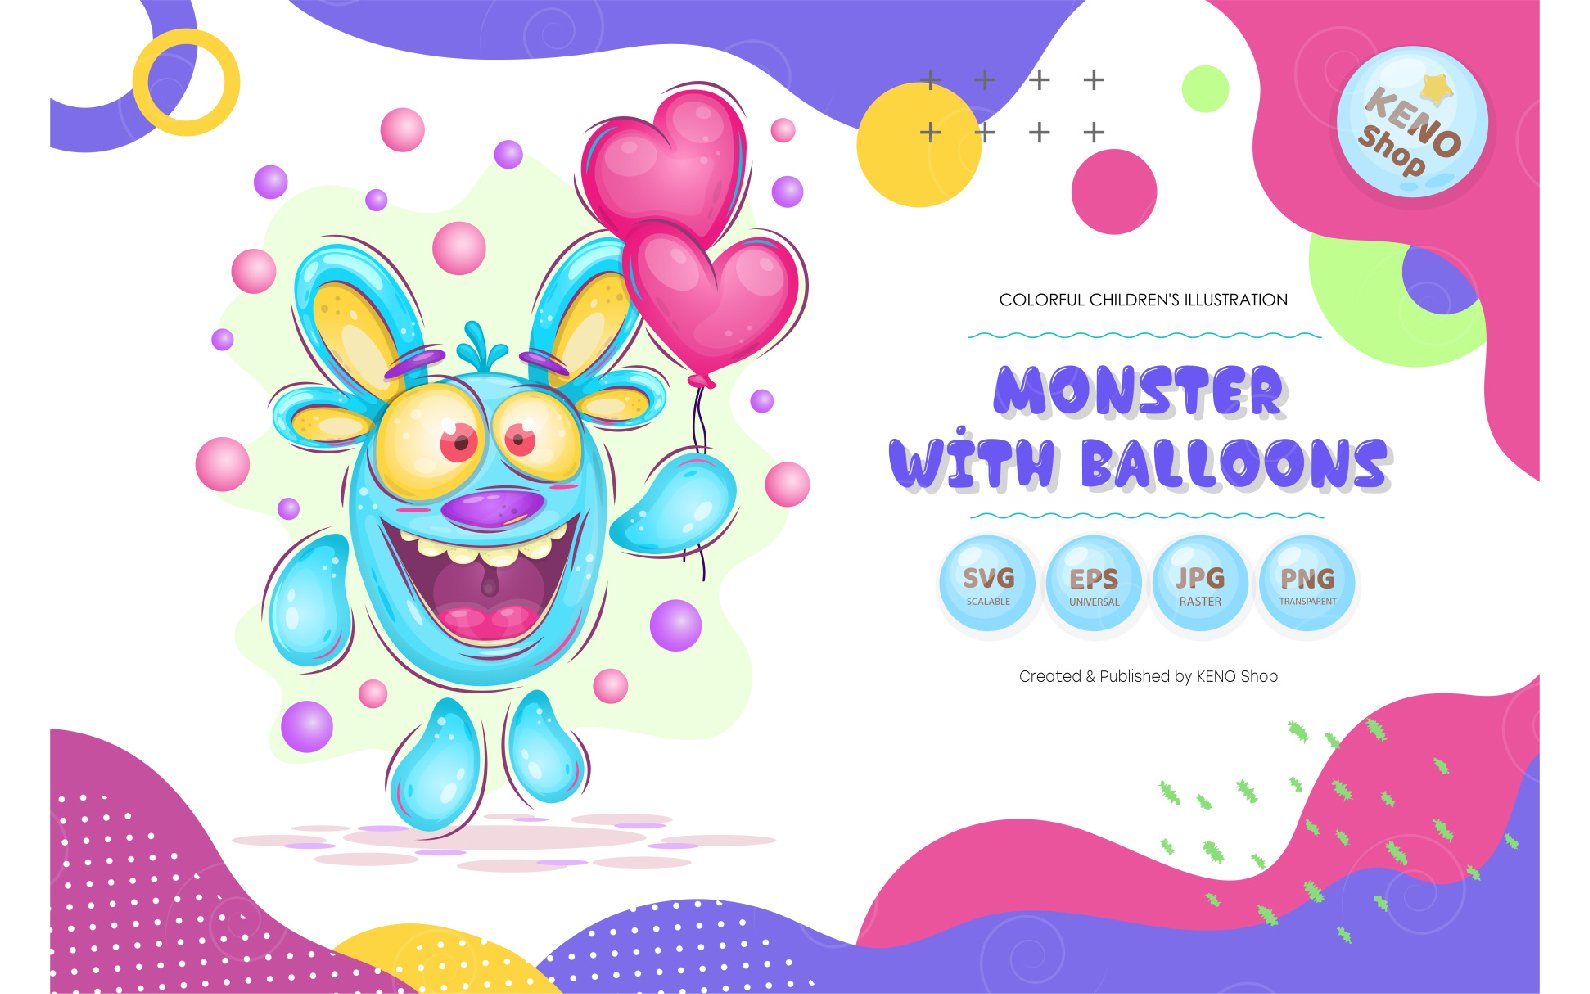 Monster with Balloons - Vector Image